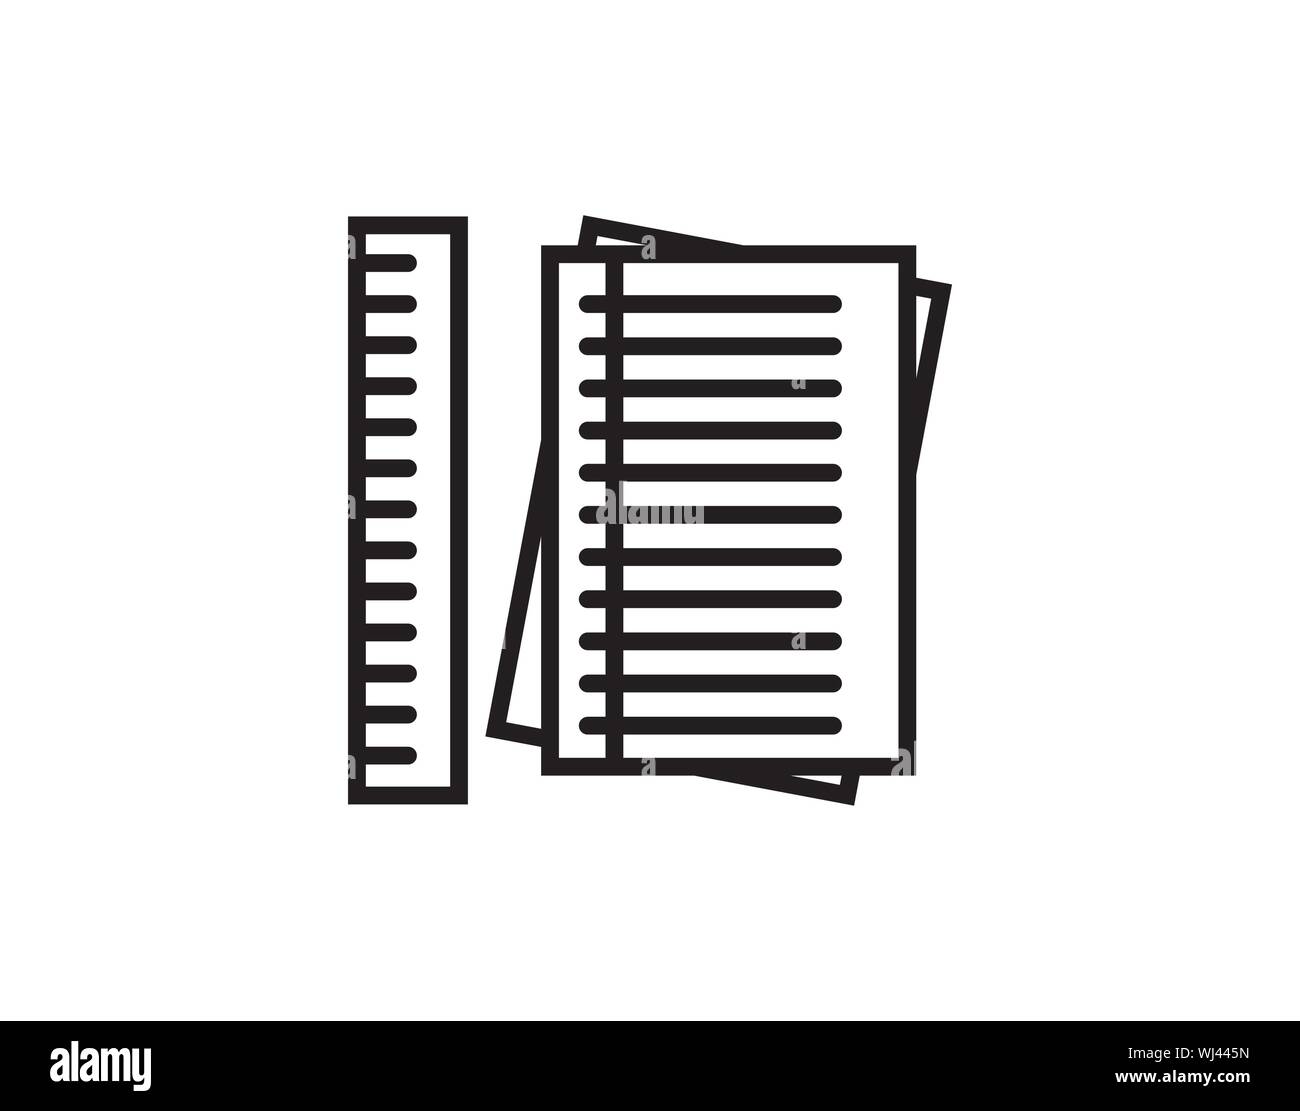 Not book and ruler icon is school equipment - Vector Stock Vector